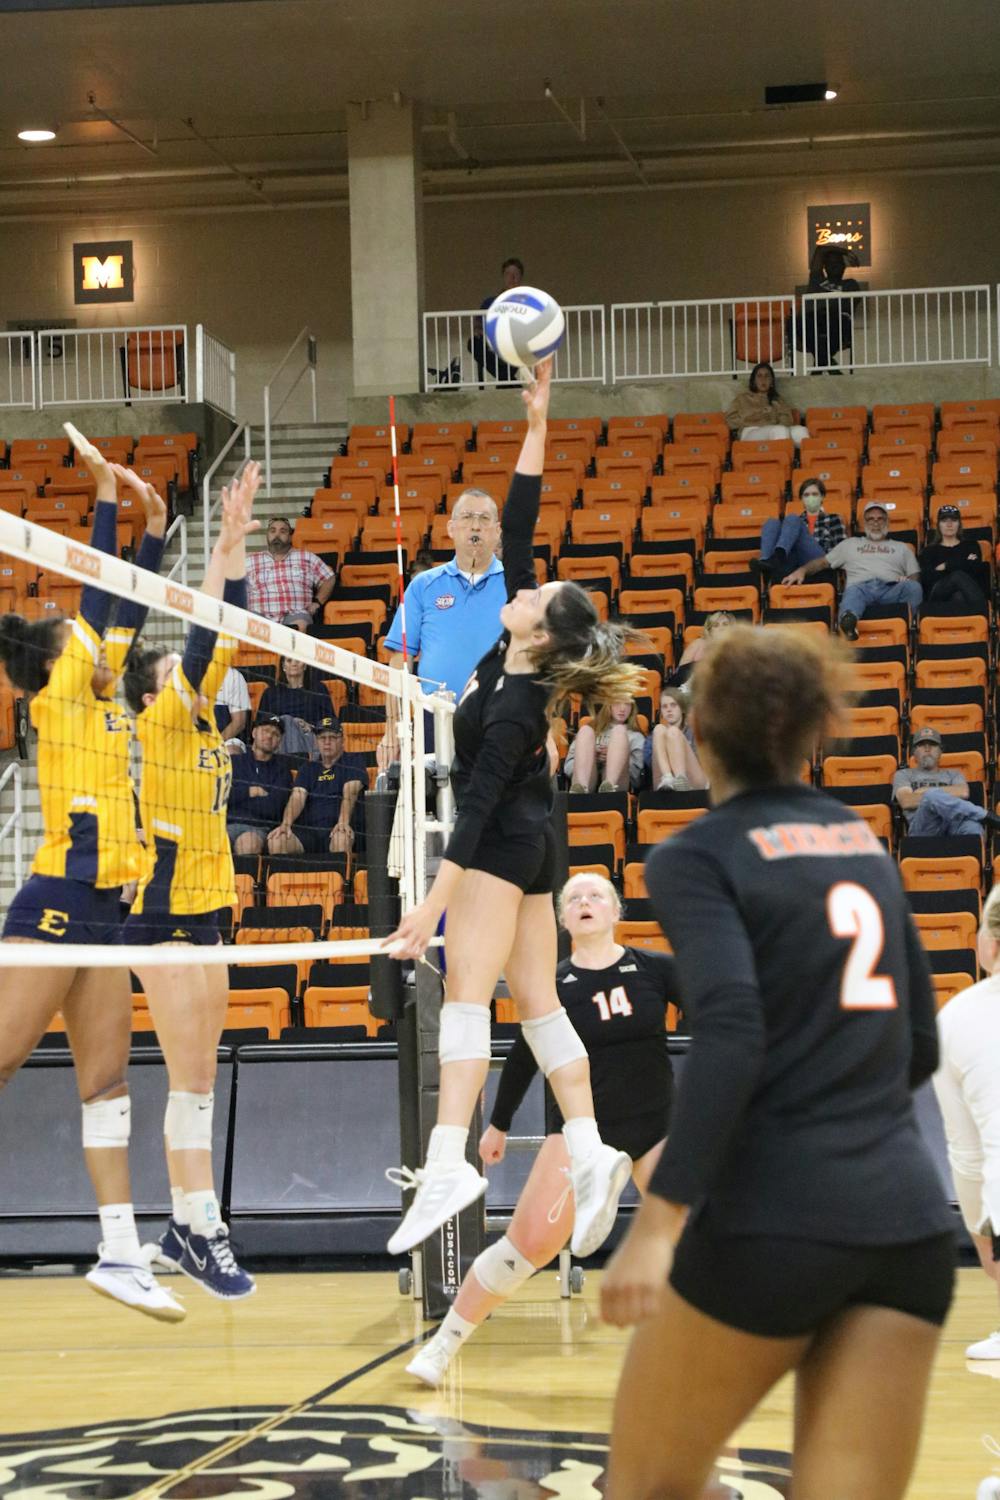 <p>Paige Wagers (#11) reaches for the ball in the game against Eastern Tennessee State University on Saturday, October 1. Wagers had eight kills in the match, but the Bears ultimately lost 3-1 to the Pirates. Photo provided by Mercer Athletics.</p>